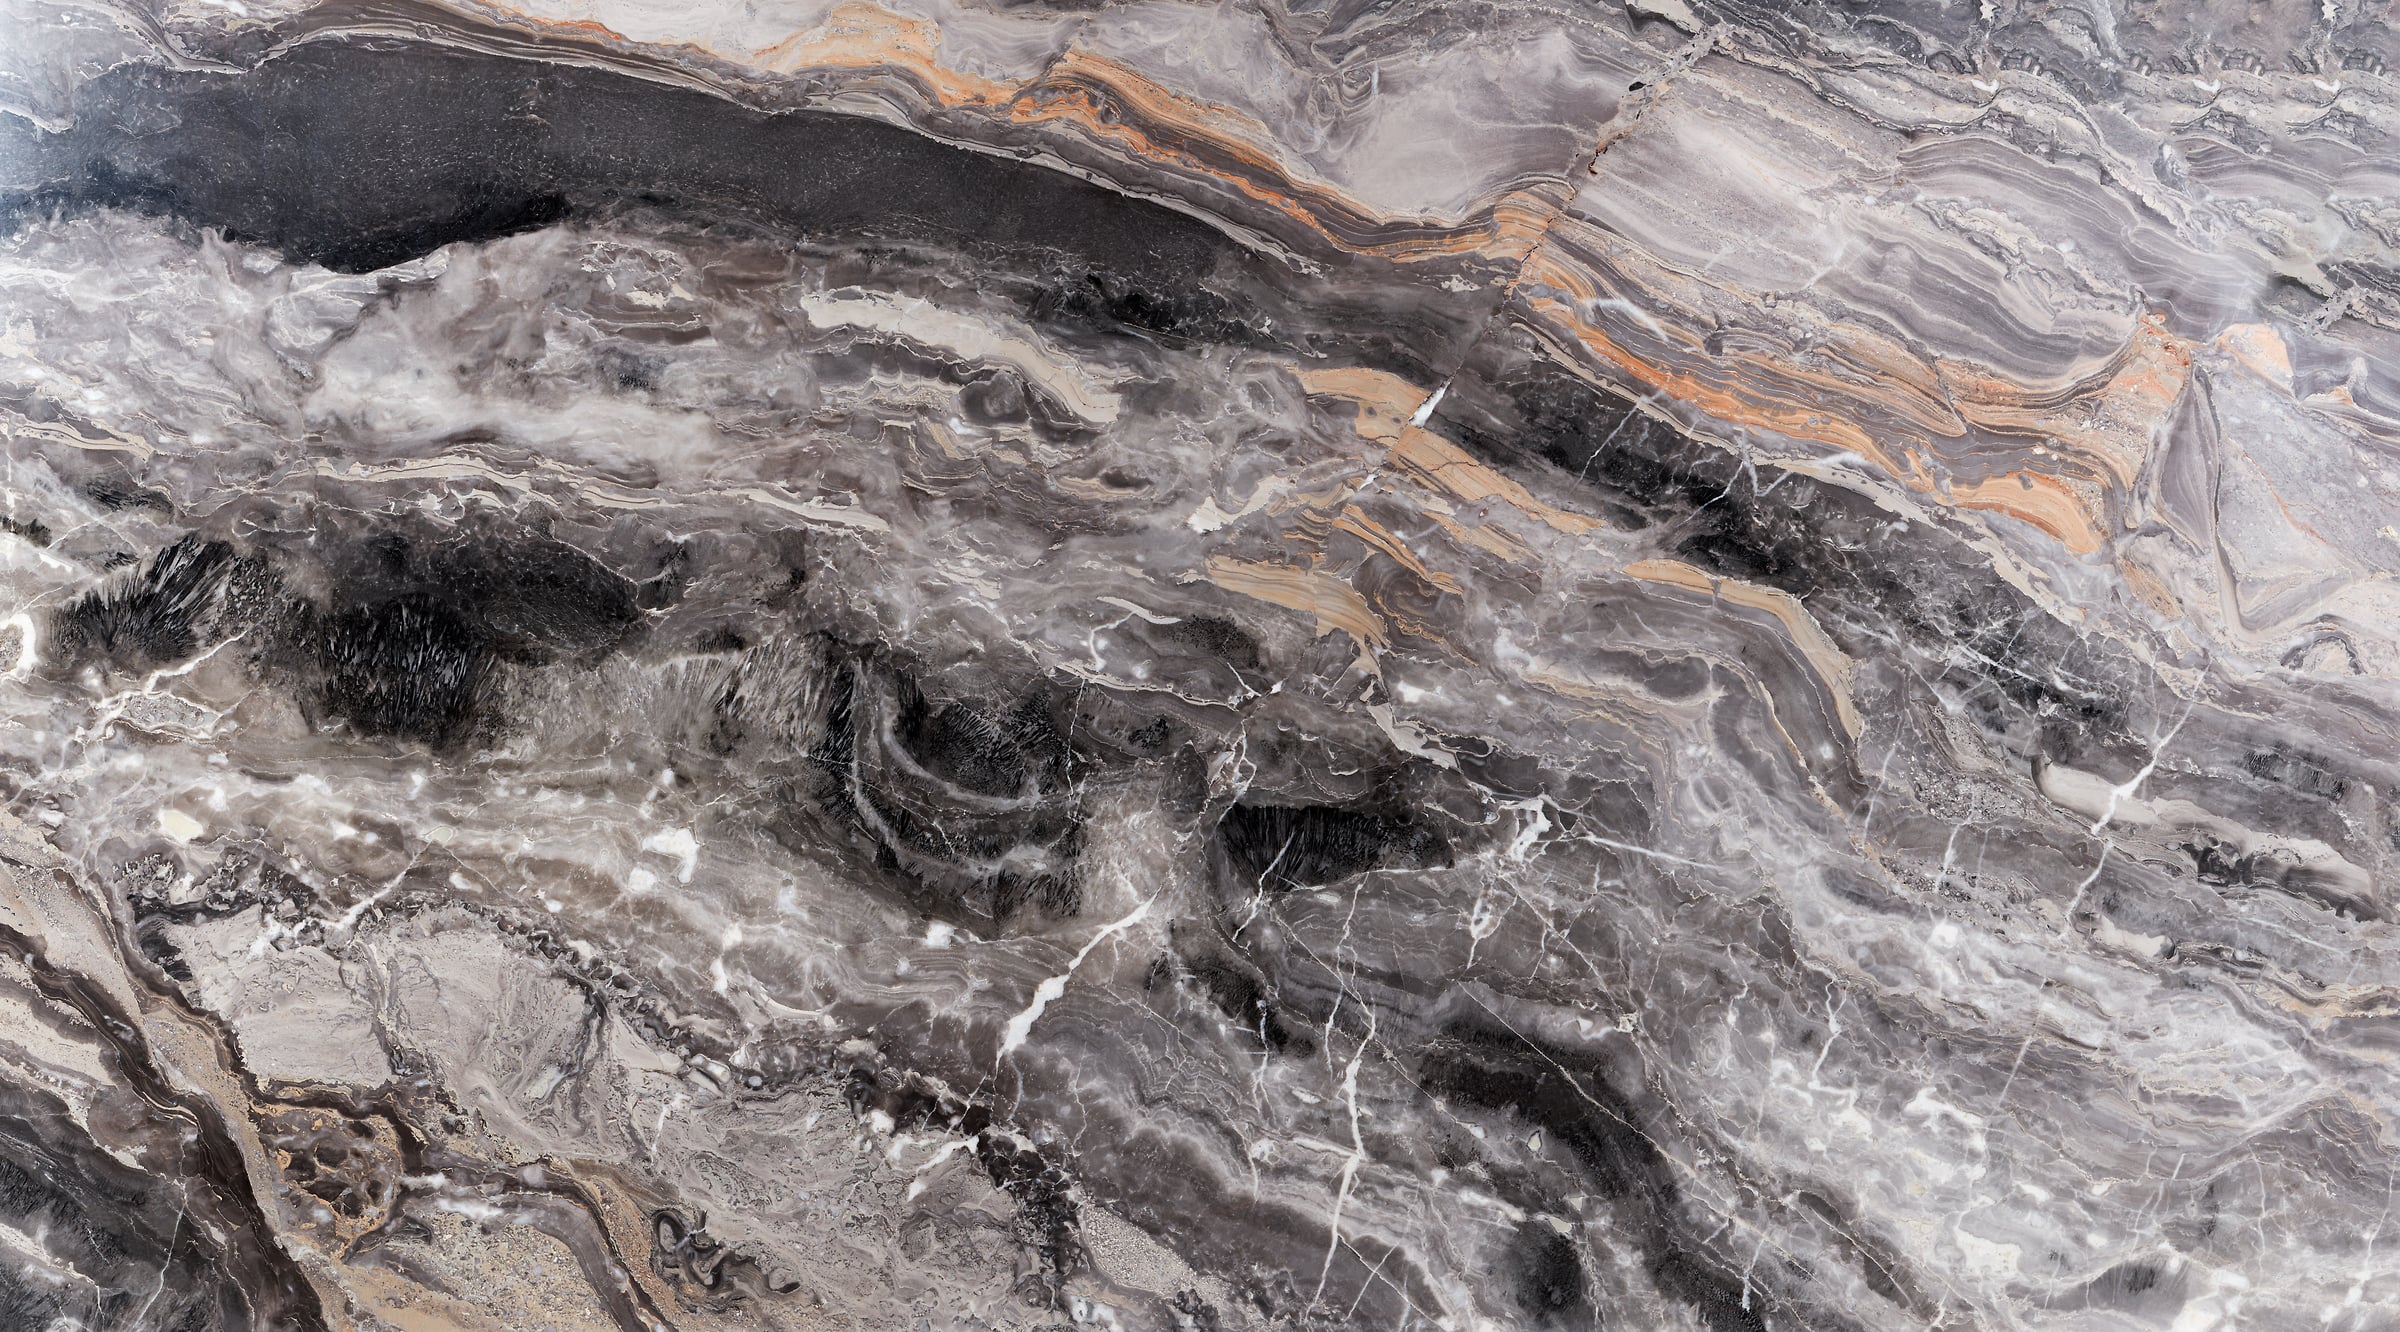 660 megapixels! An ultra-high-resolution texture photo file of arabescato orobico grigio marble stone; gigapixel photograph created by David Lineton.